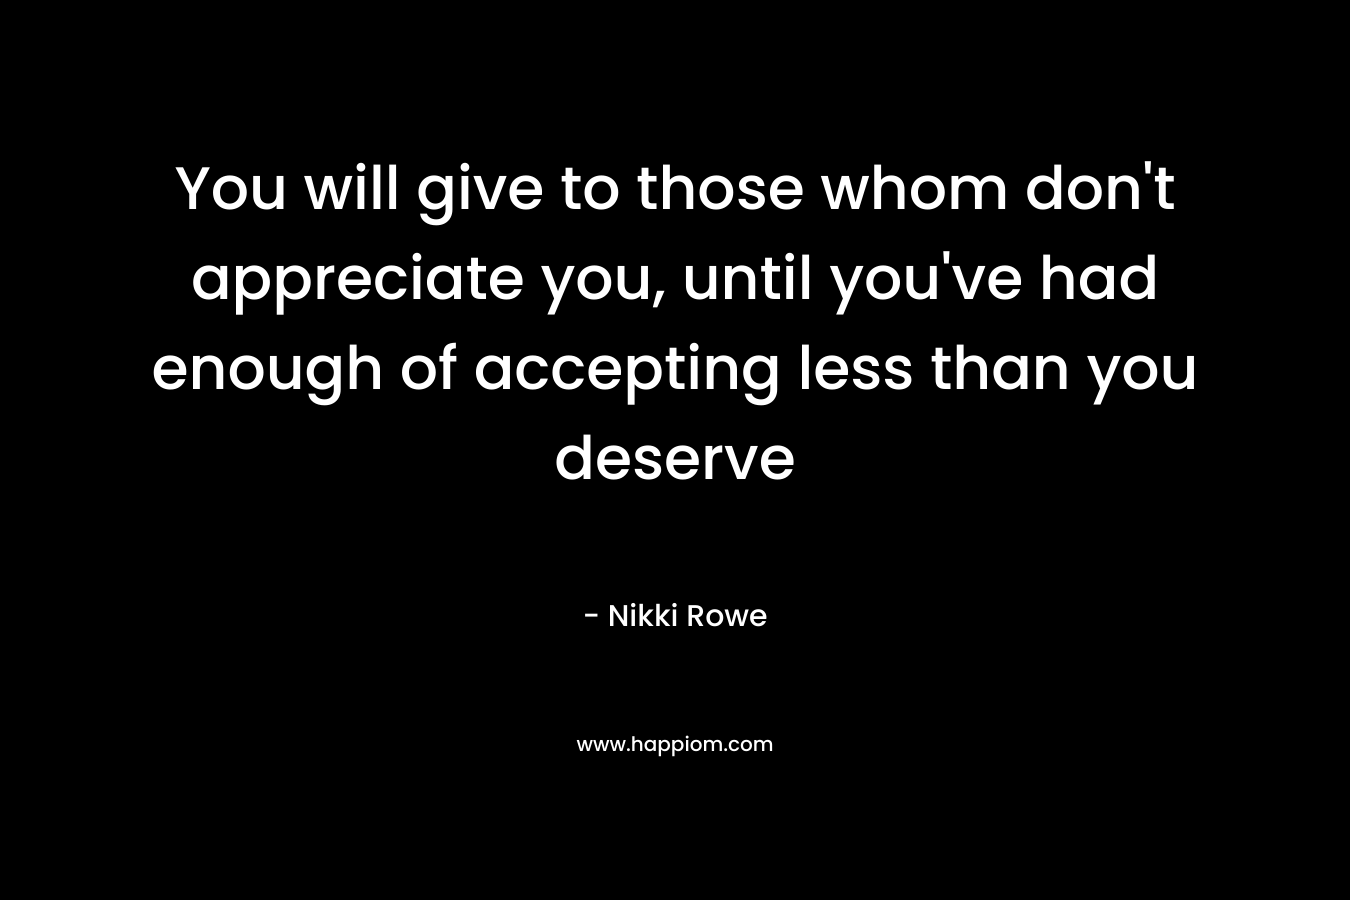 You will give to those whom don’t appreciate you, until you’ve had enough of accepting less than you deserve – Nikki Rowe